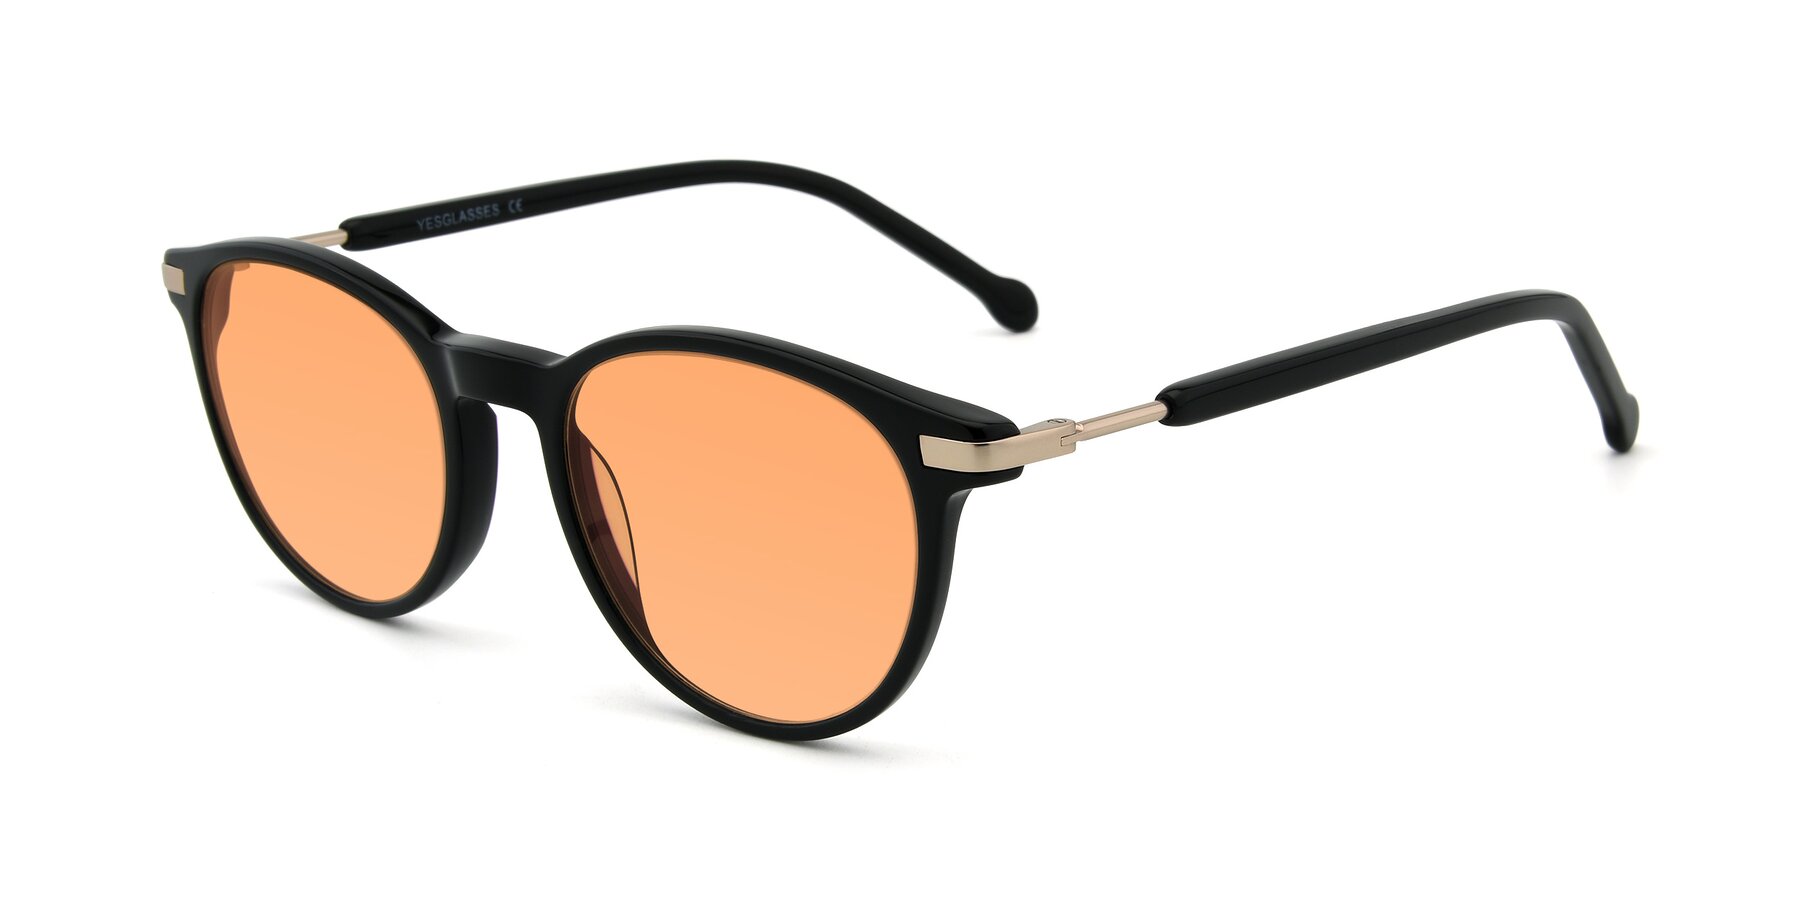 Angle of 17429 in Black with Medium Orange Tinted Lenses